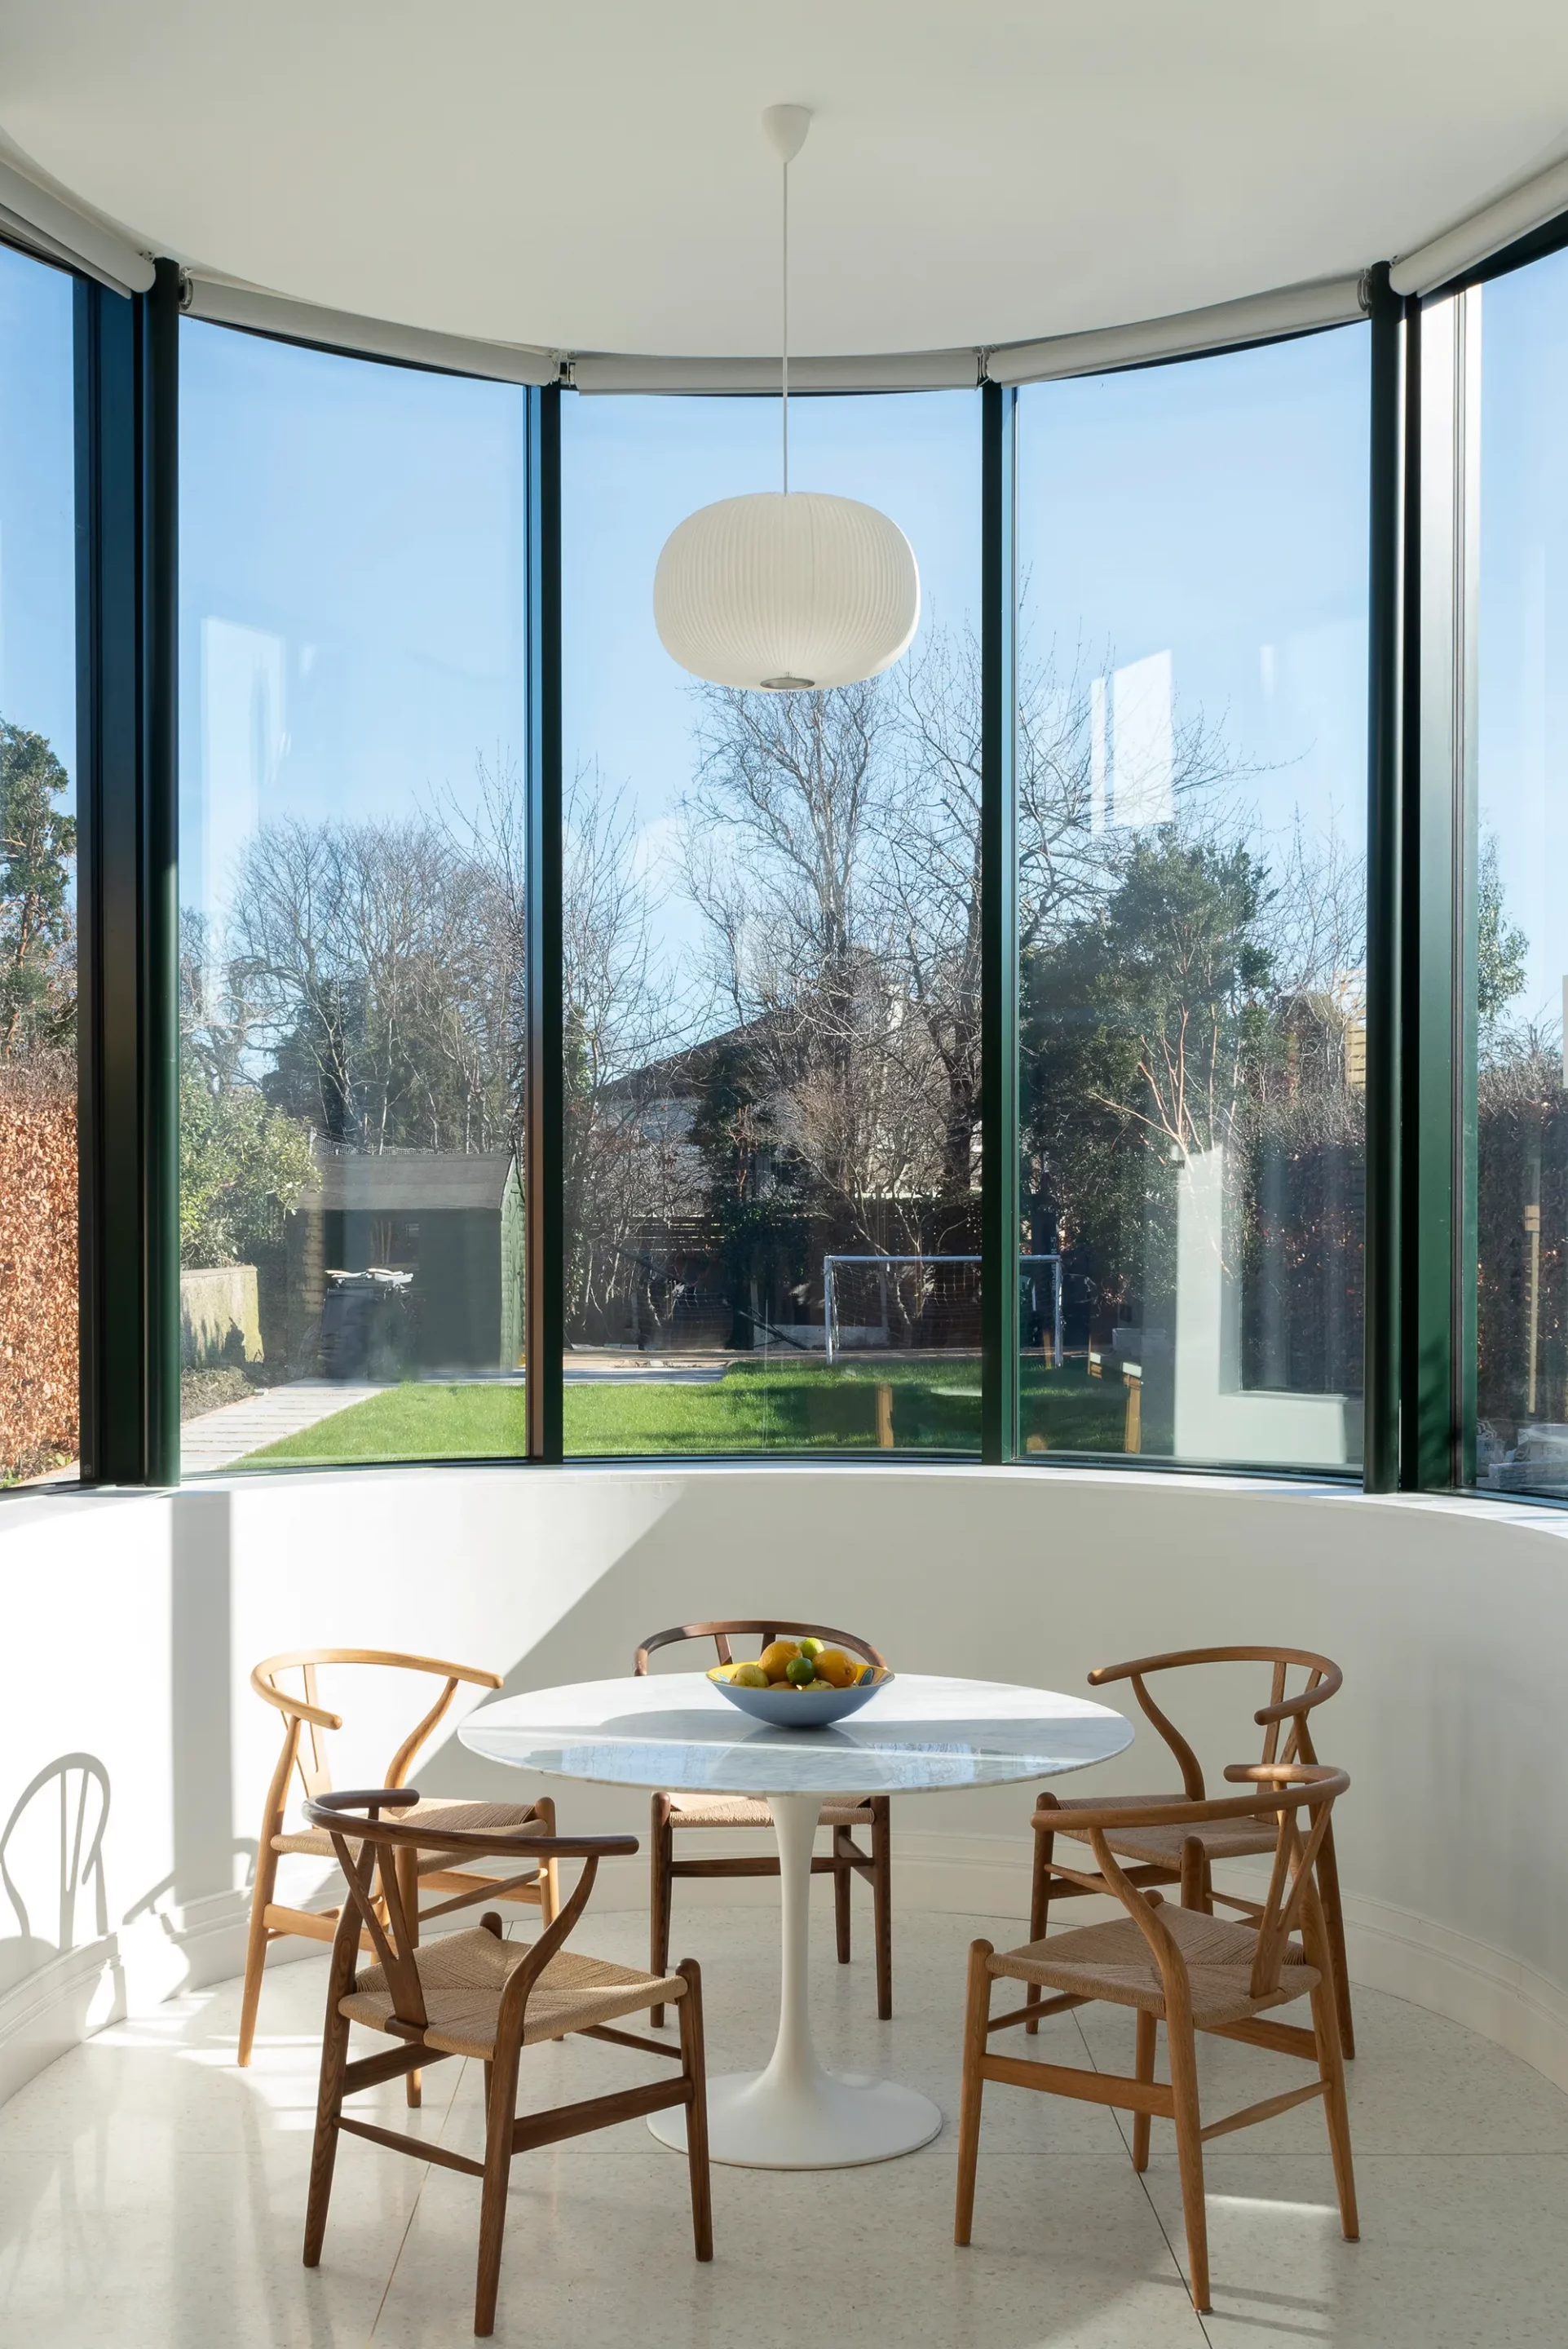 Dining area inside curved glass conservatory